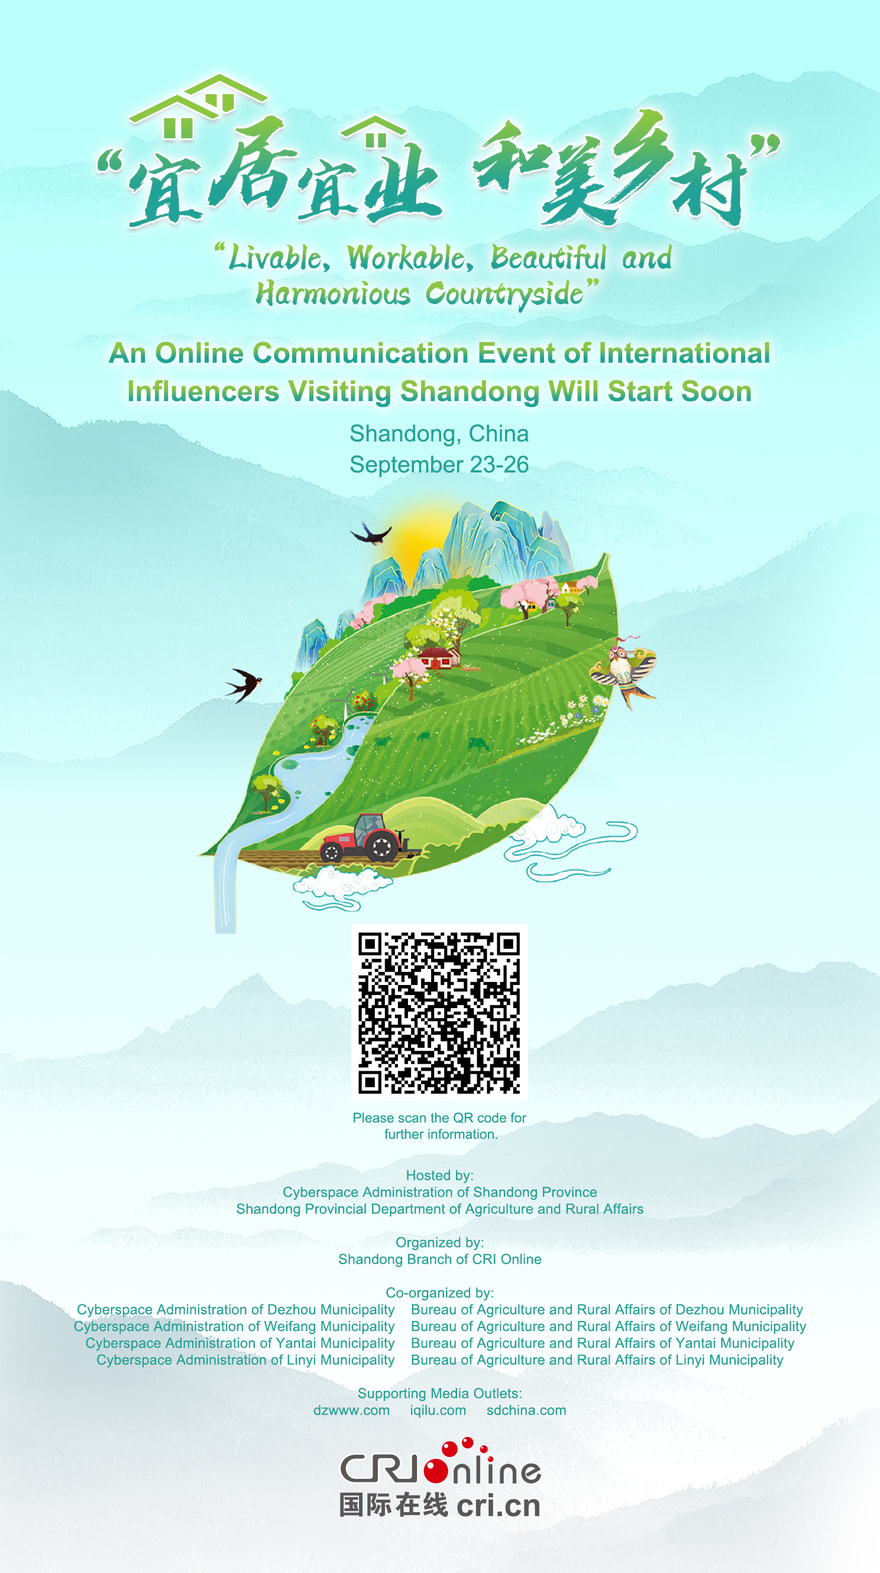 "Livable, Workable, Beautiful and Harmonious Countryside" — An Online Communication Event of International Influencers Visiting Shandong to be held_fororder_海报新